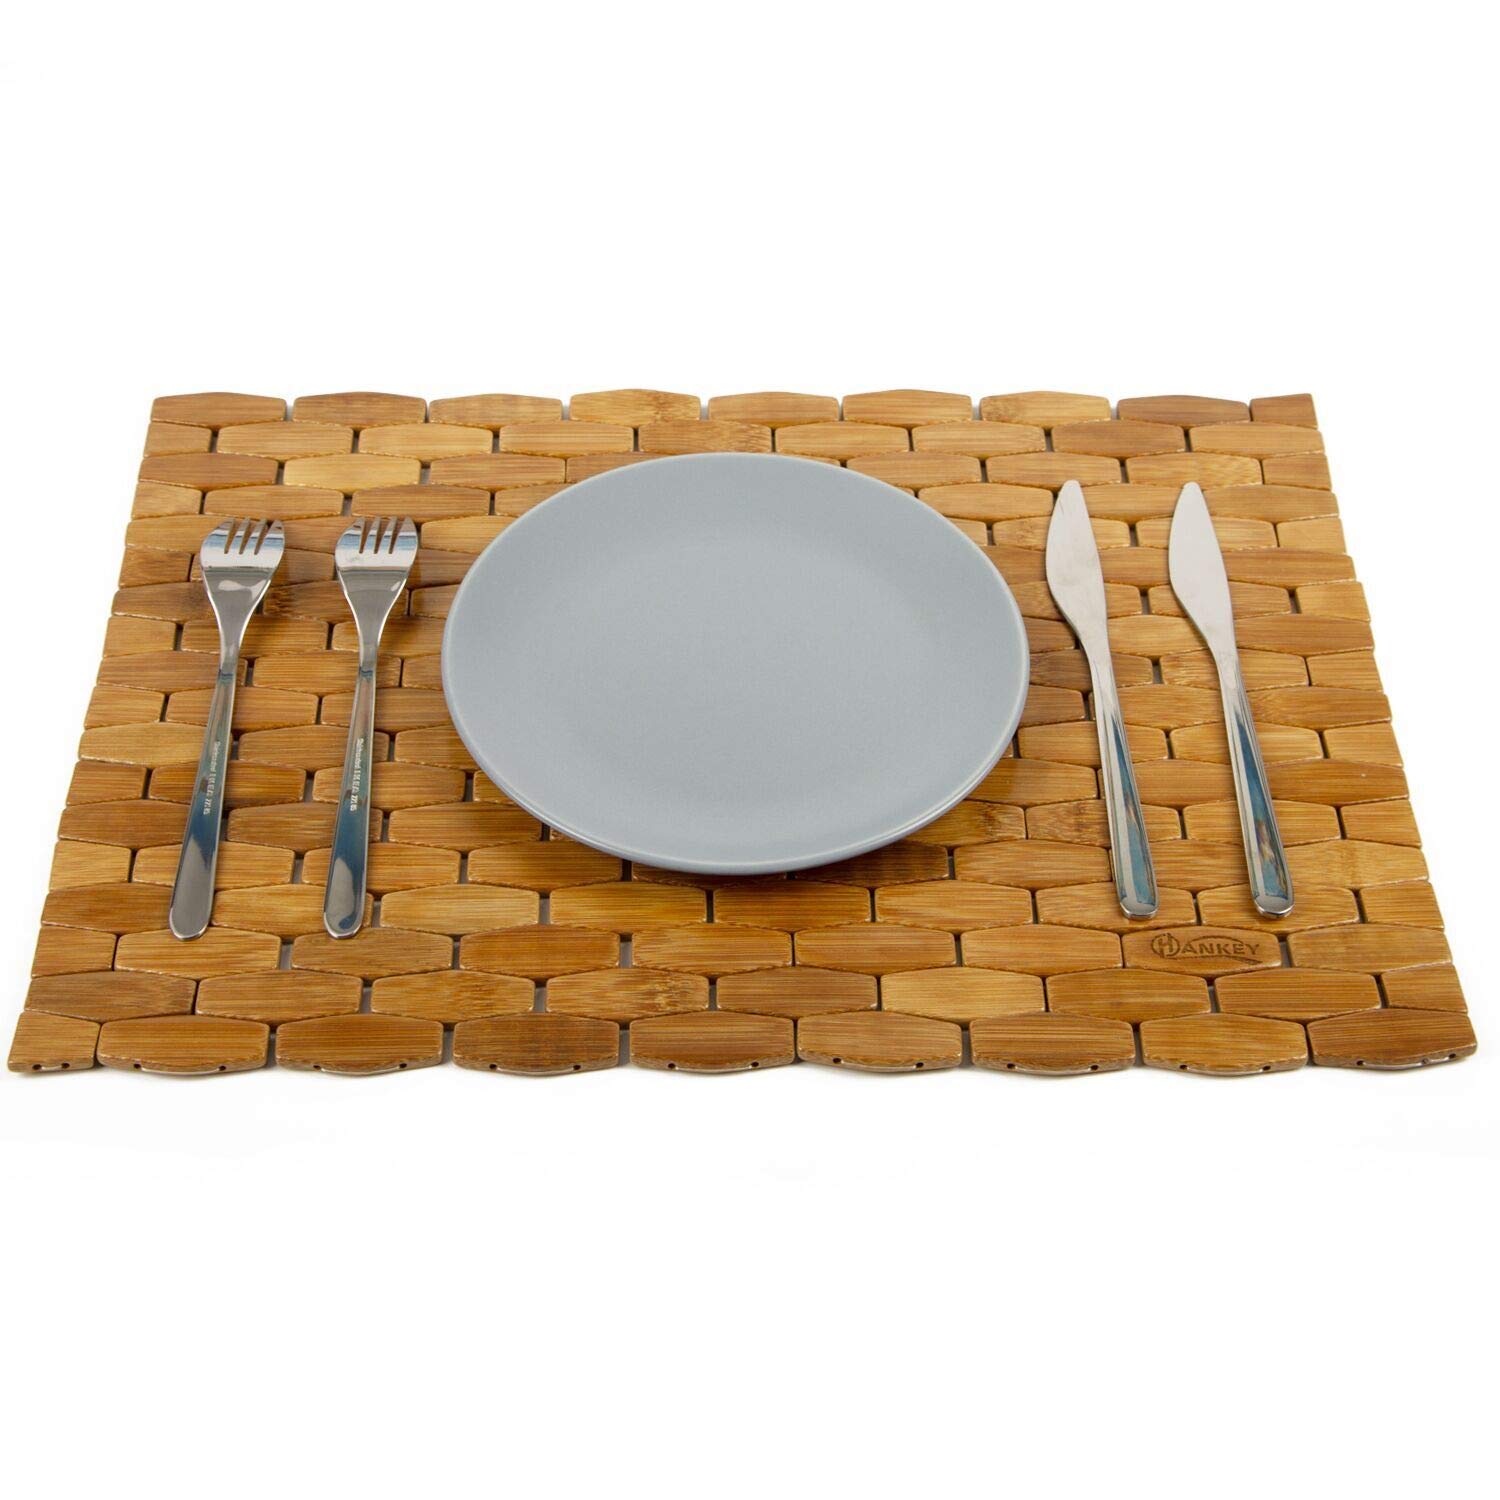 HANKEY Bamboo Place Mats, Dining Mat, Decoration for Table, Heat Insulation Hexagon Natural Color Set of 4 Eco-Friendly